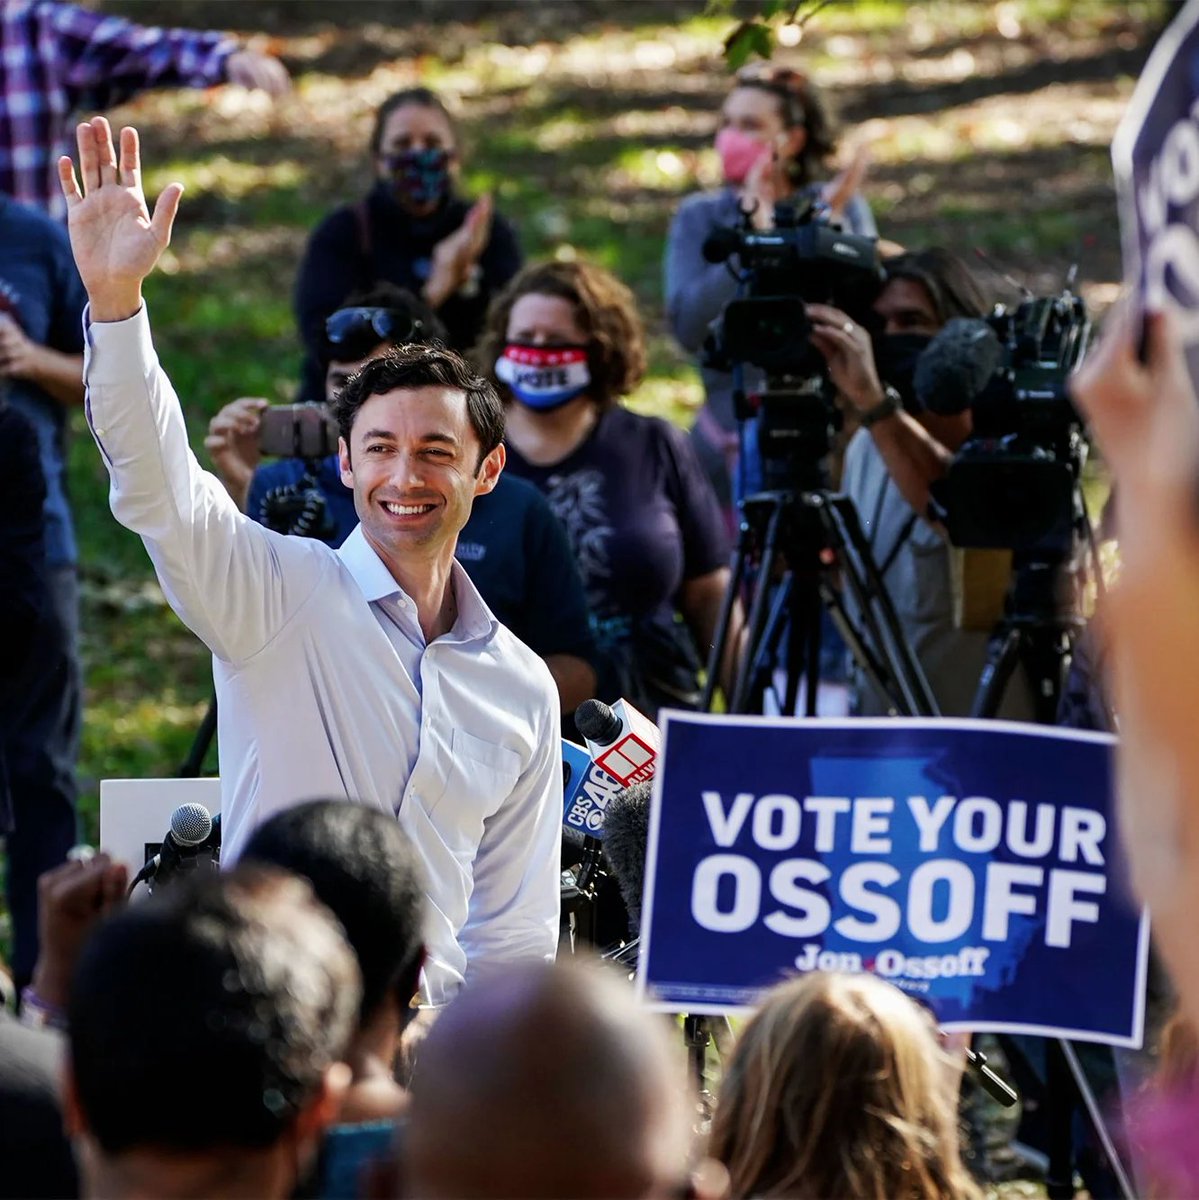 PLEASE!We can fix this, Georgia. @ossoff